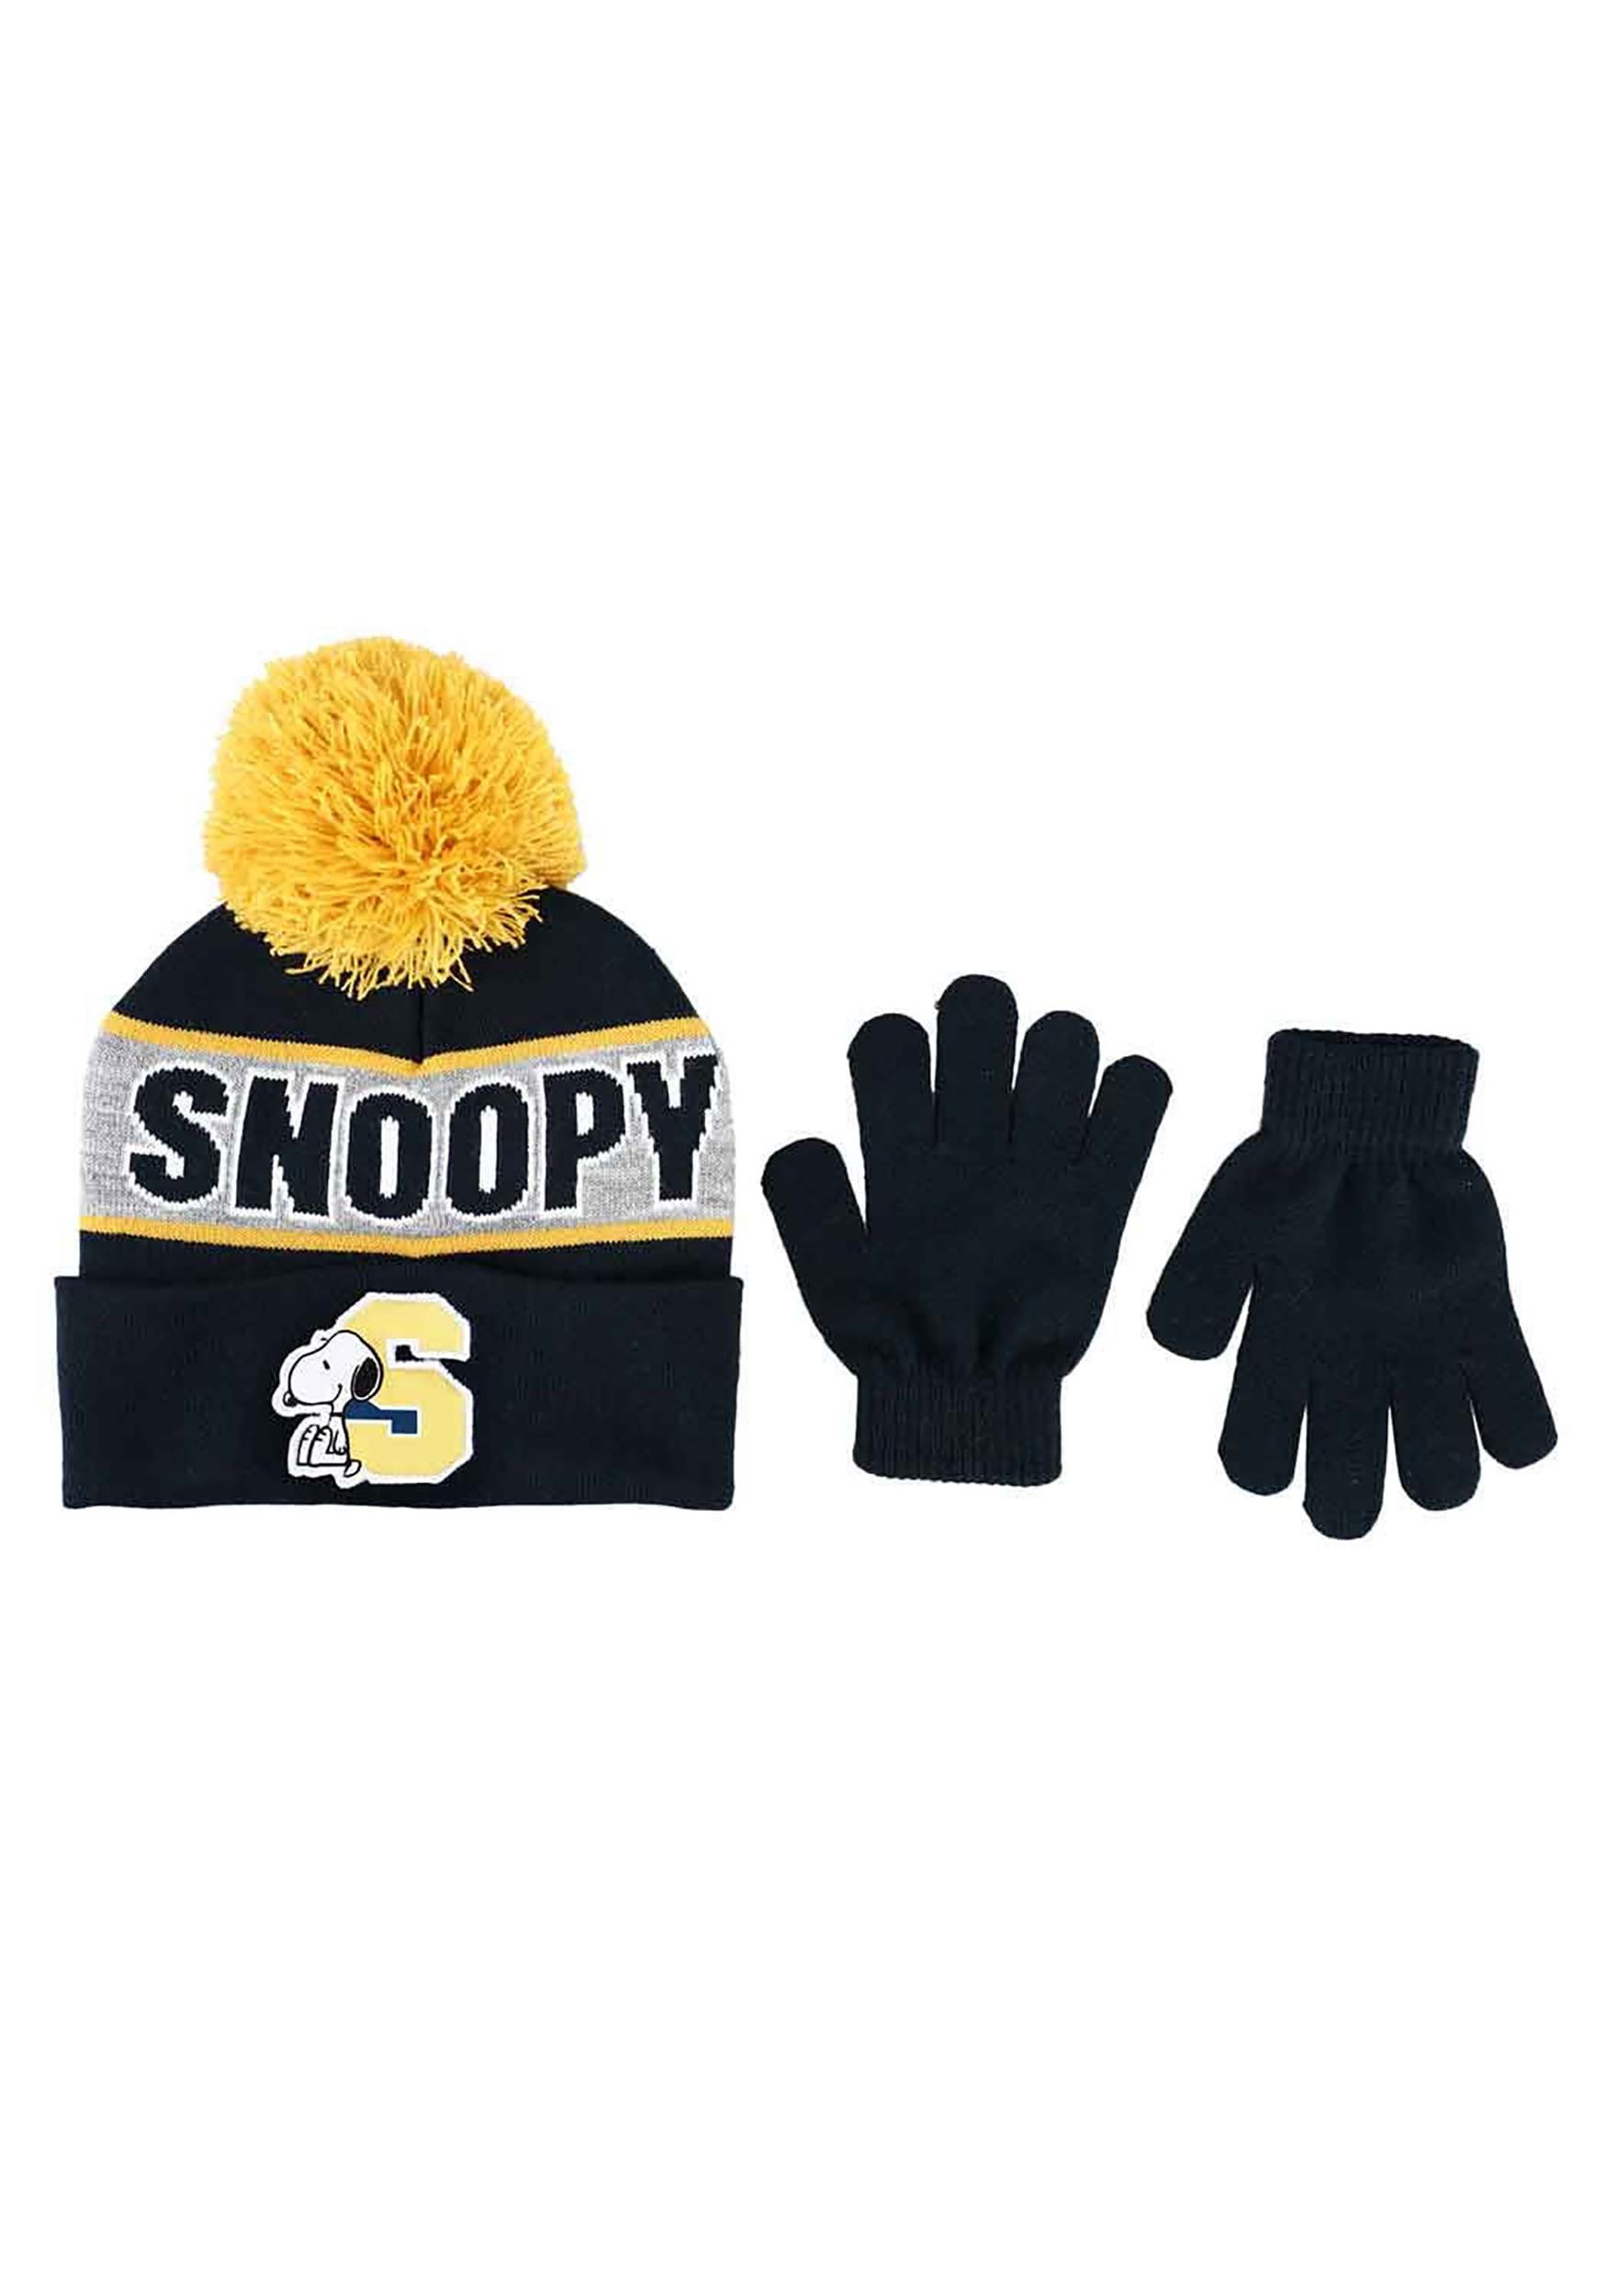 The Peanuts Snoopy Kids Beanie & Gloves Combo